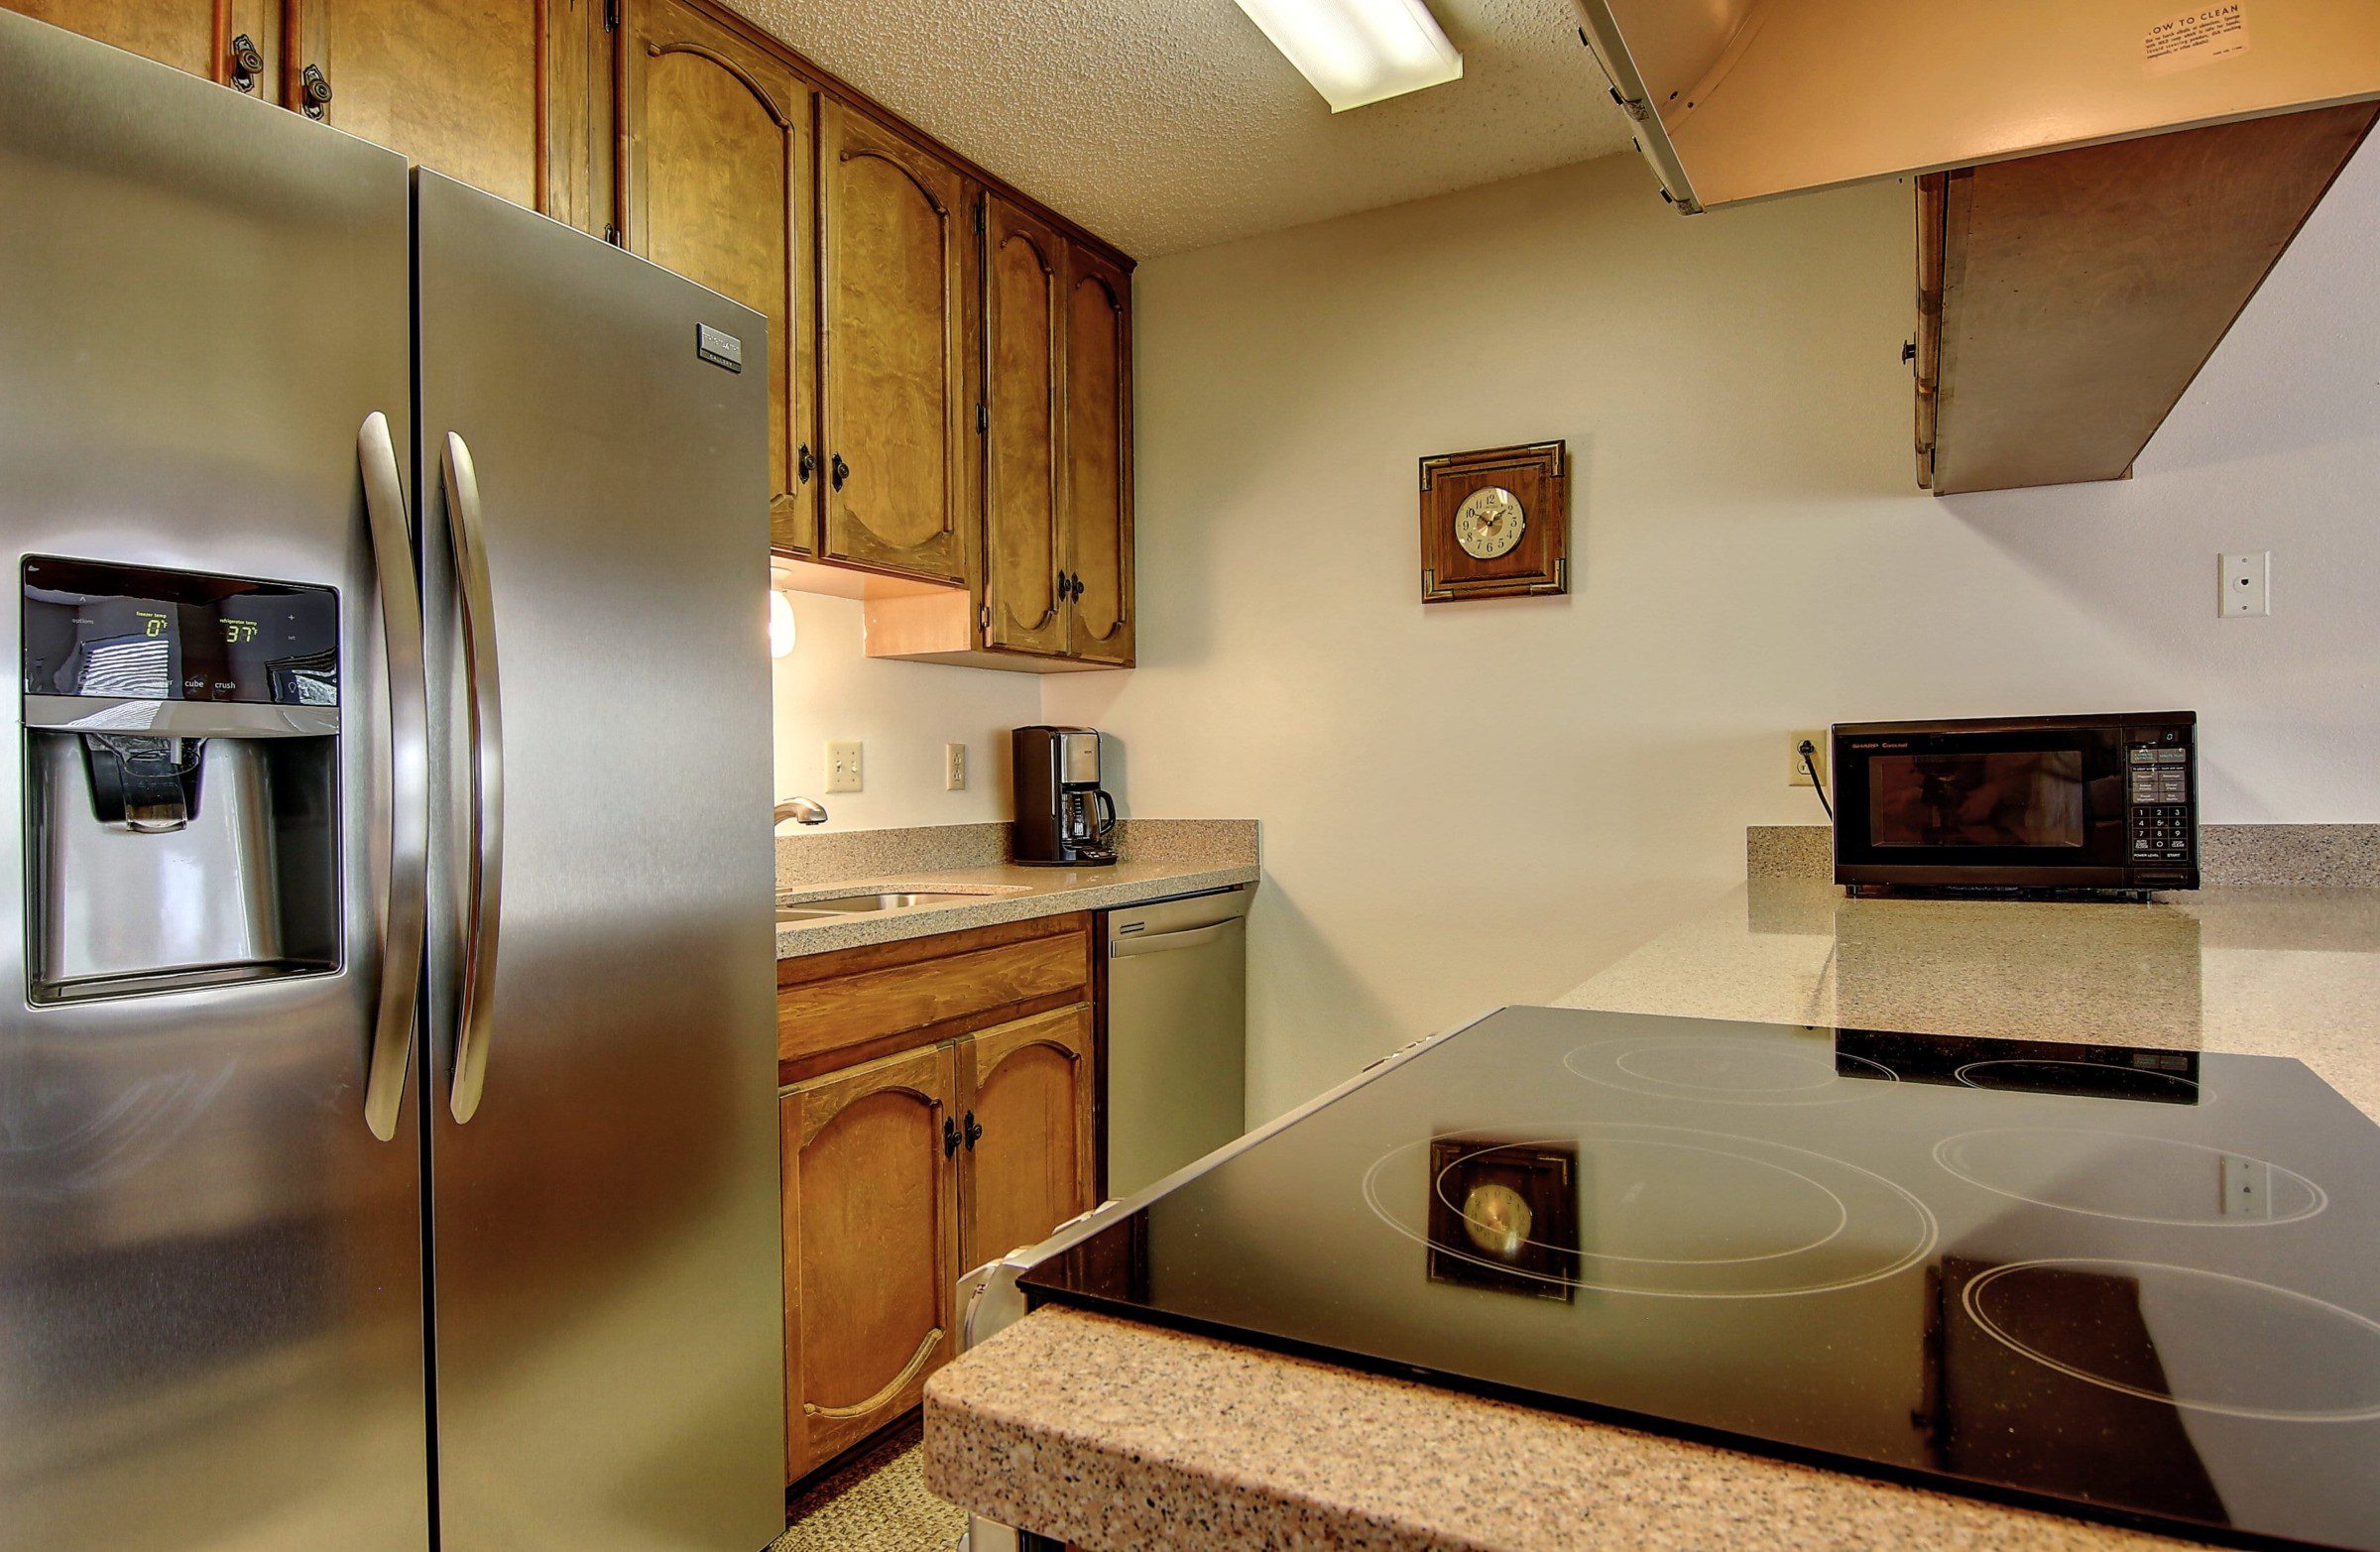 Comal River vacation home kitchen